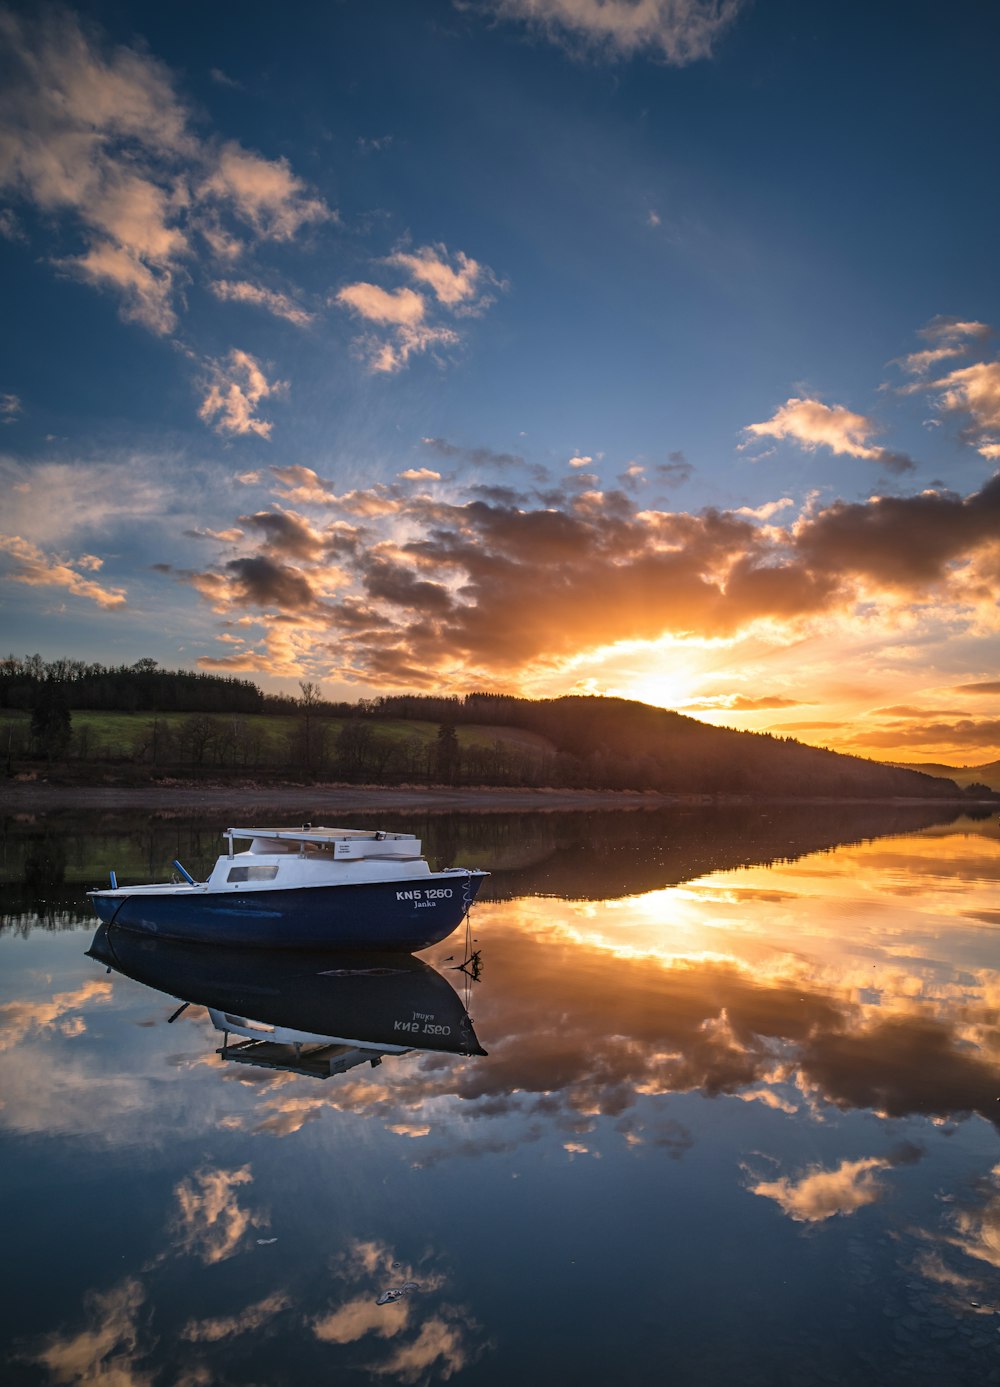 white and black boat on water during sunset